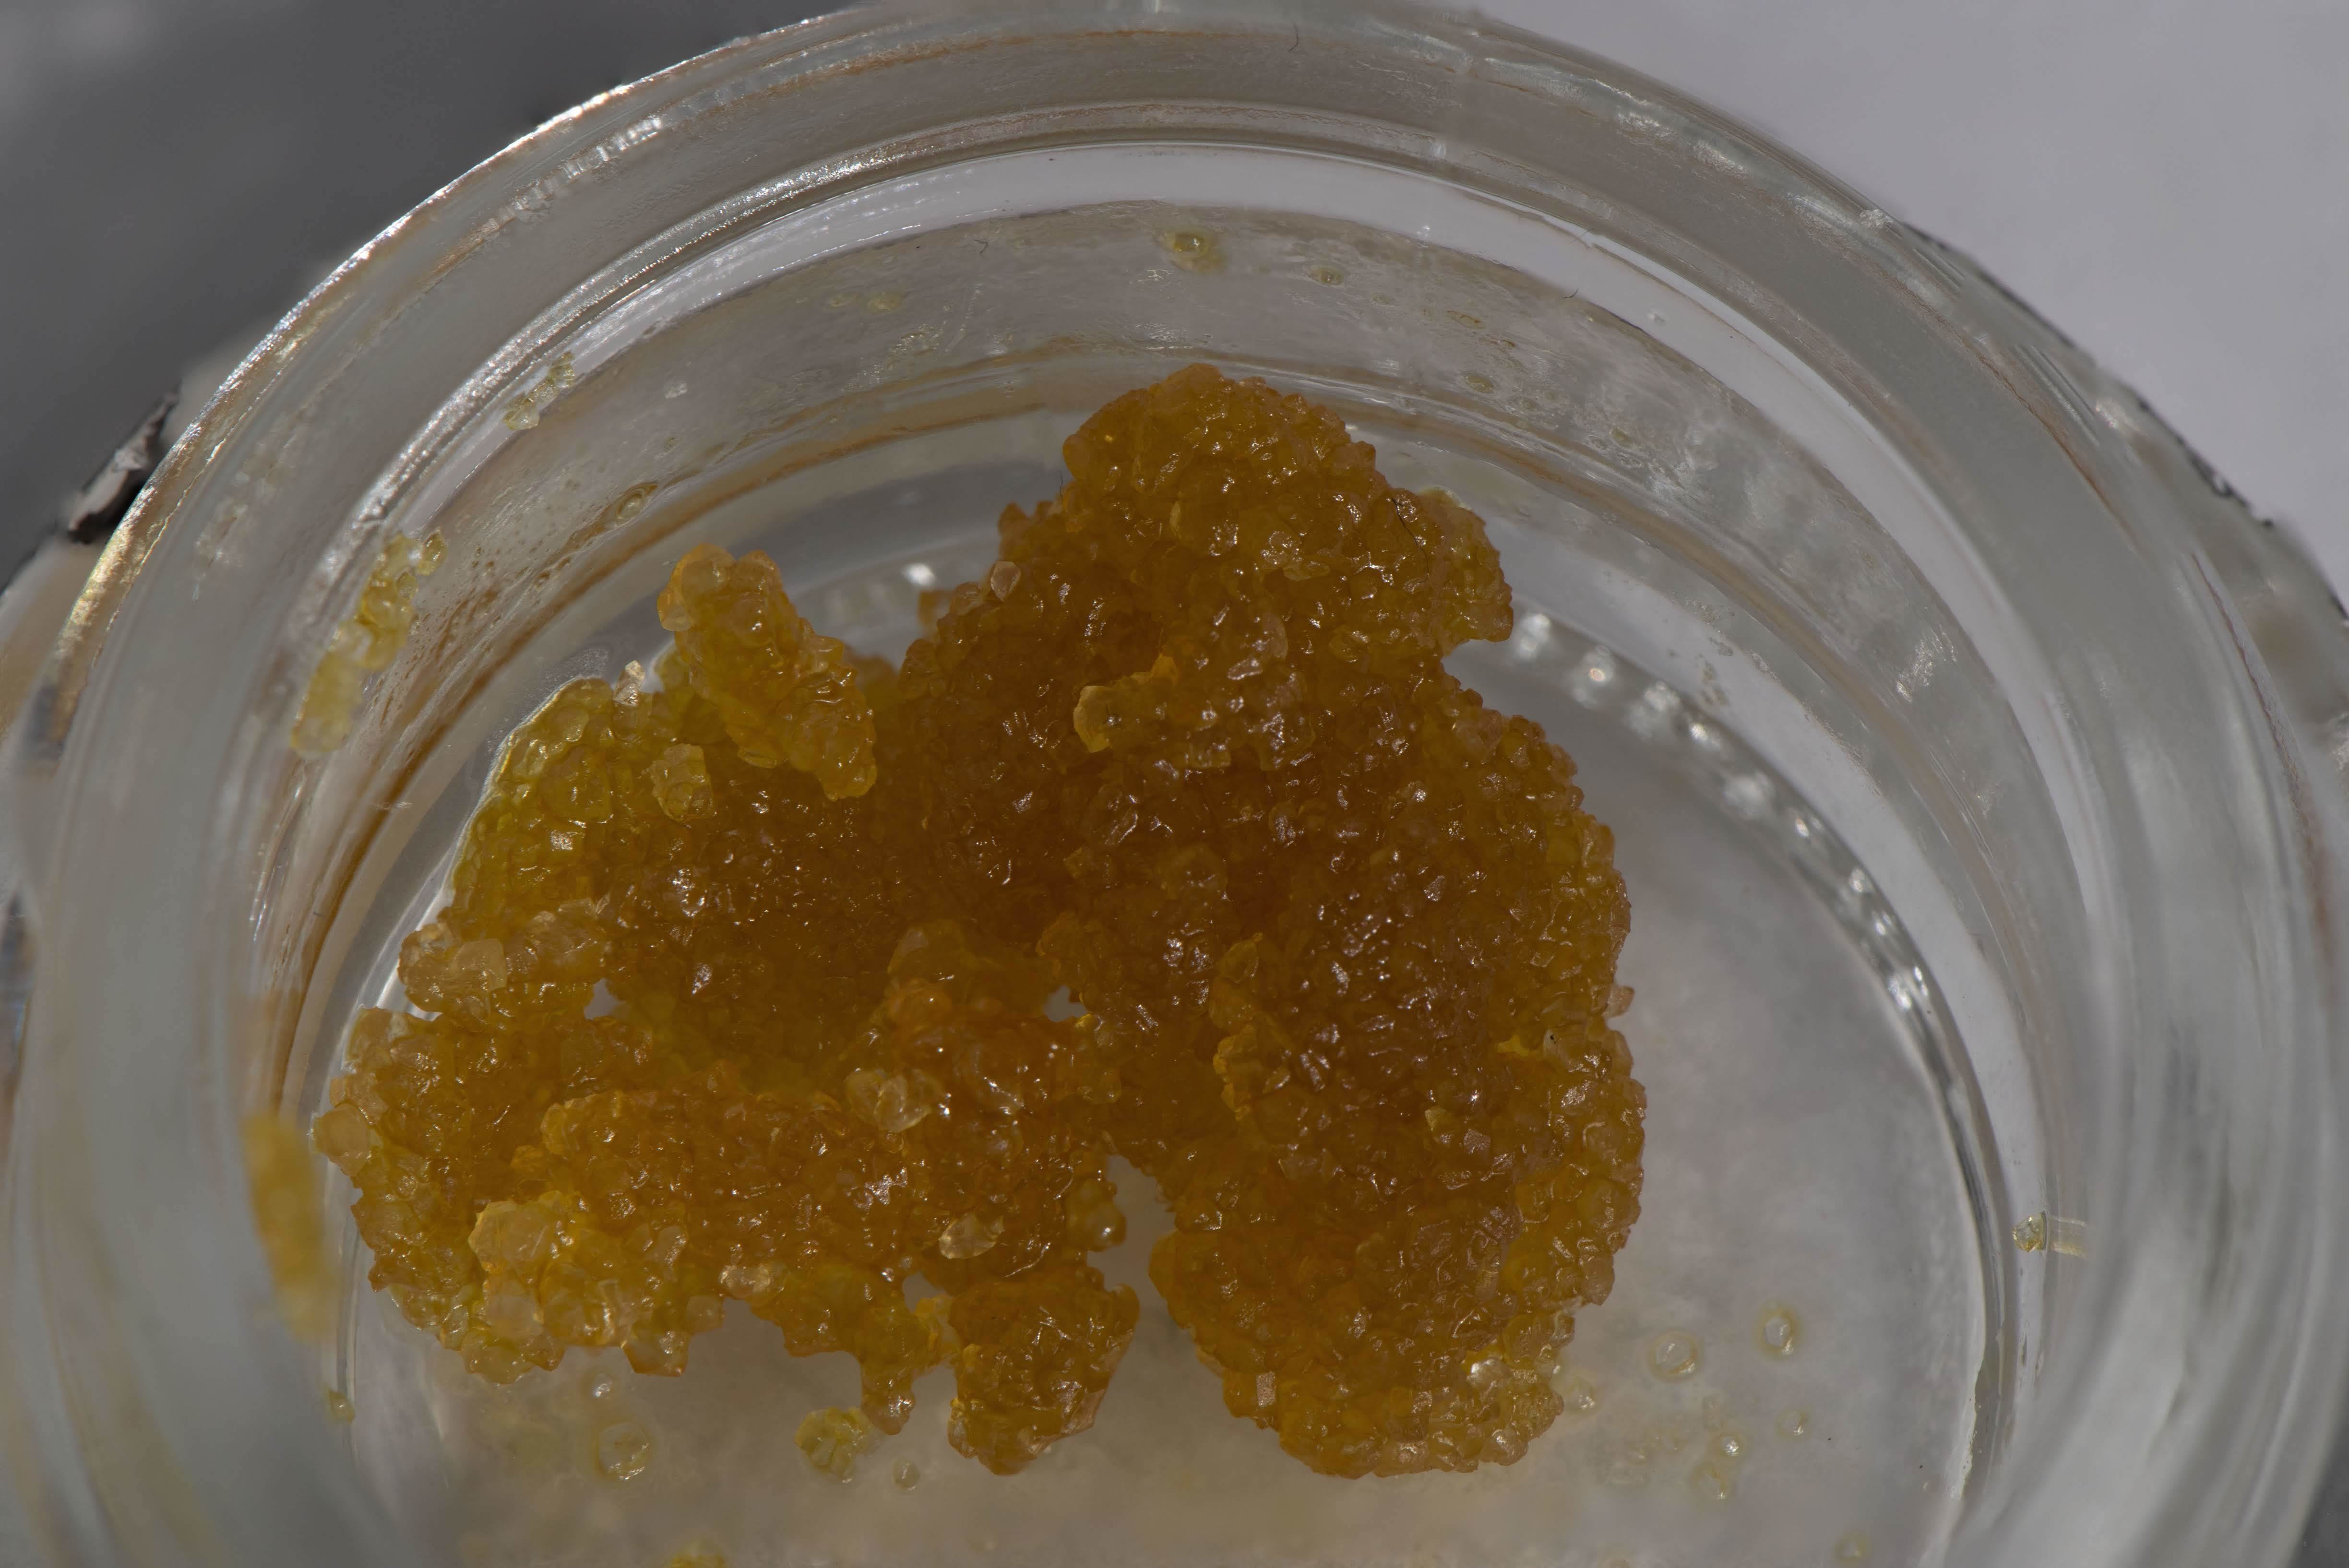 concentrate-apex-extracts-flo-og-live-resin